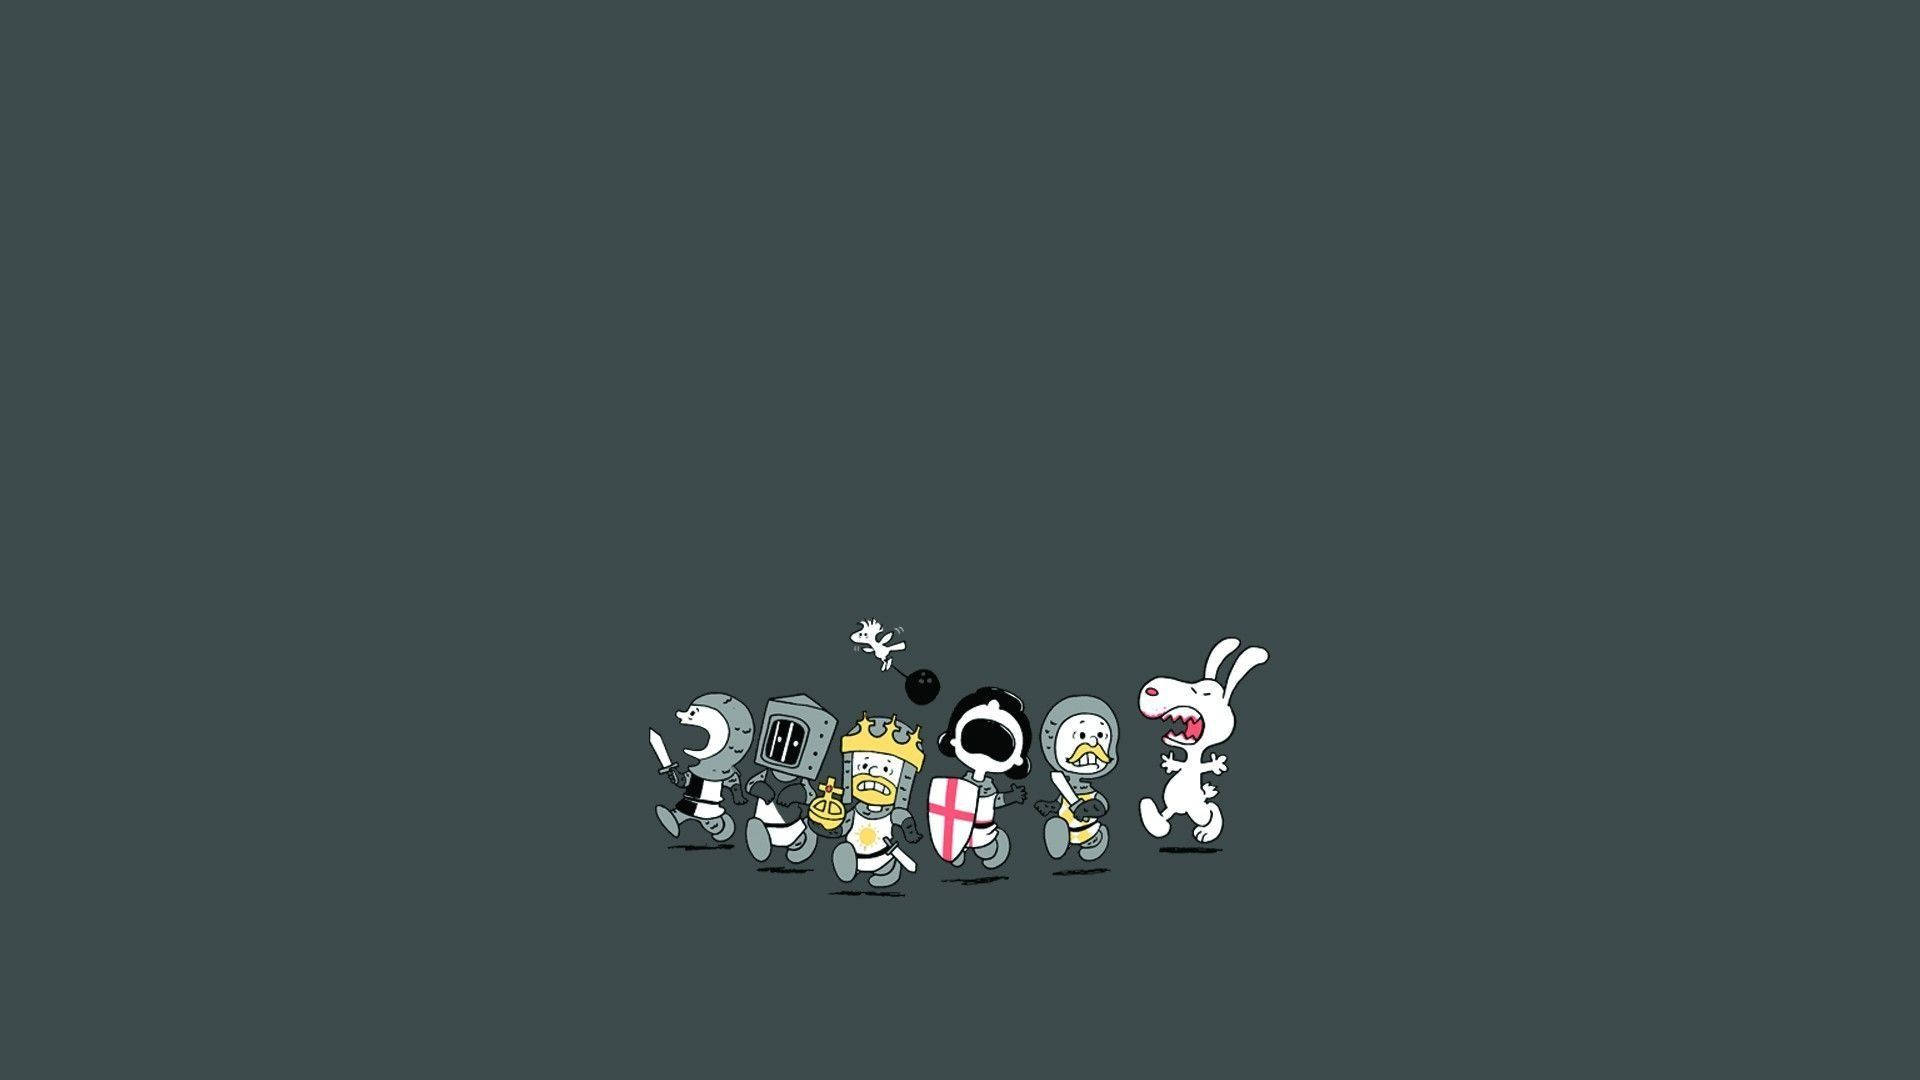 The Snoopy Gang are prepared to defend the world! Wallpaper